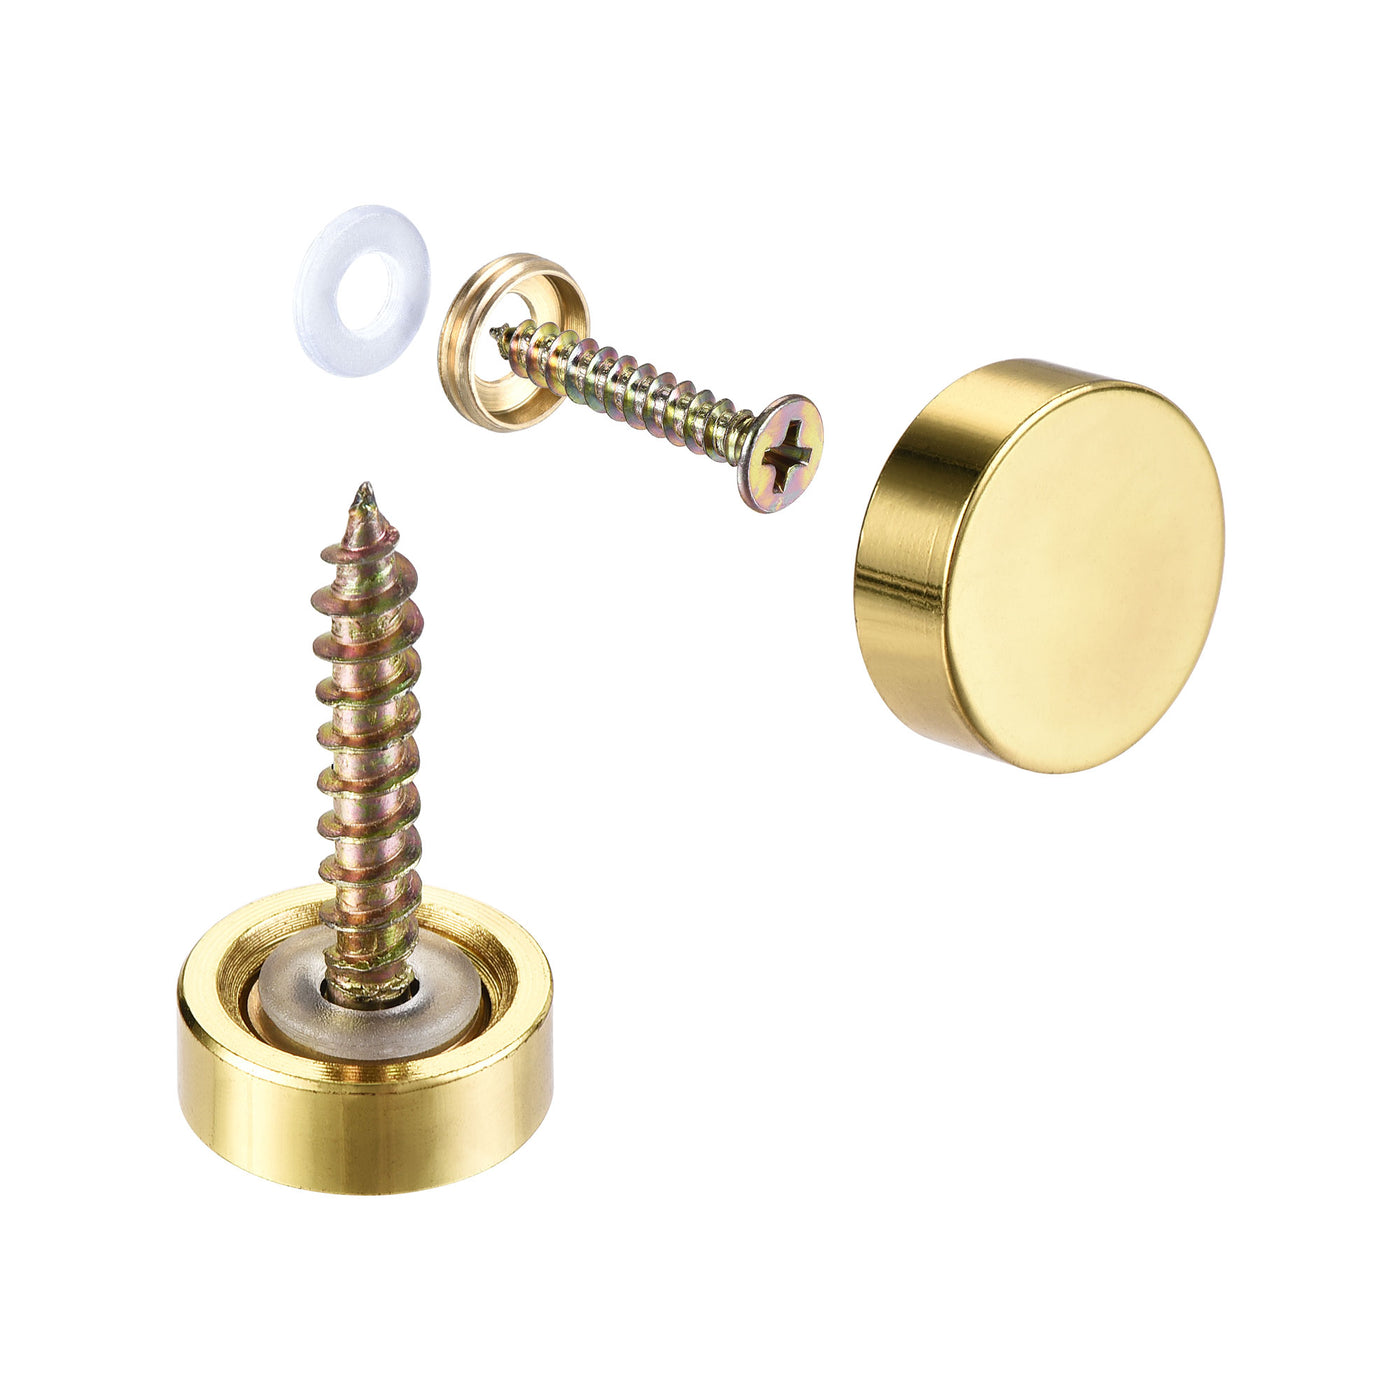 uxcell Uxcell Mirror Screws, 14mm/0.55", 20pcs Decorative Cap Fasteners Cover Nails, Electroplating, Bright Gold 304 Stainless Steel